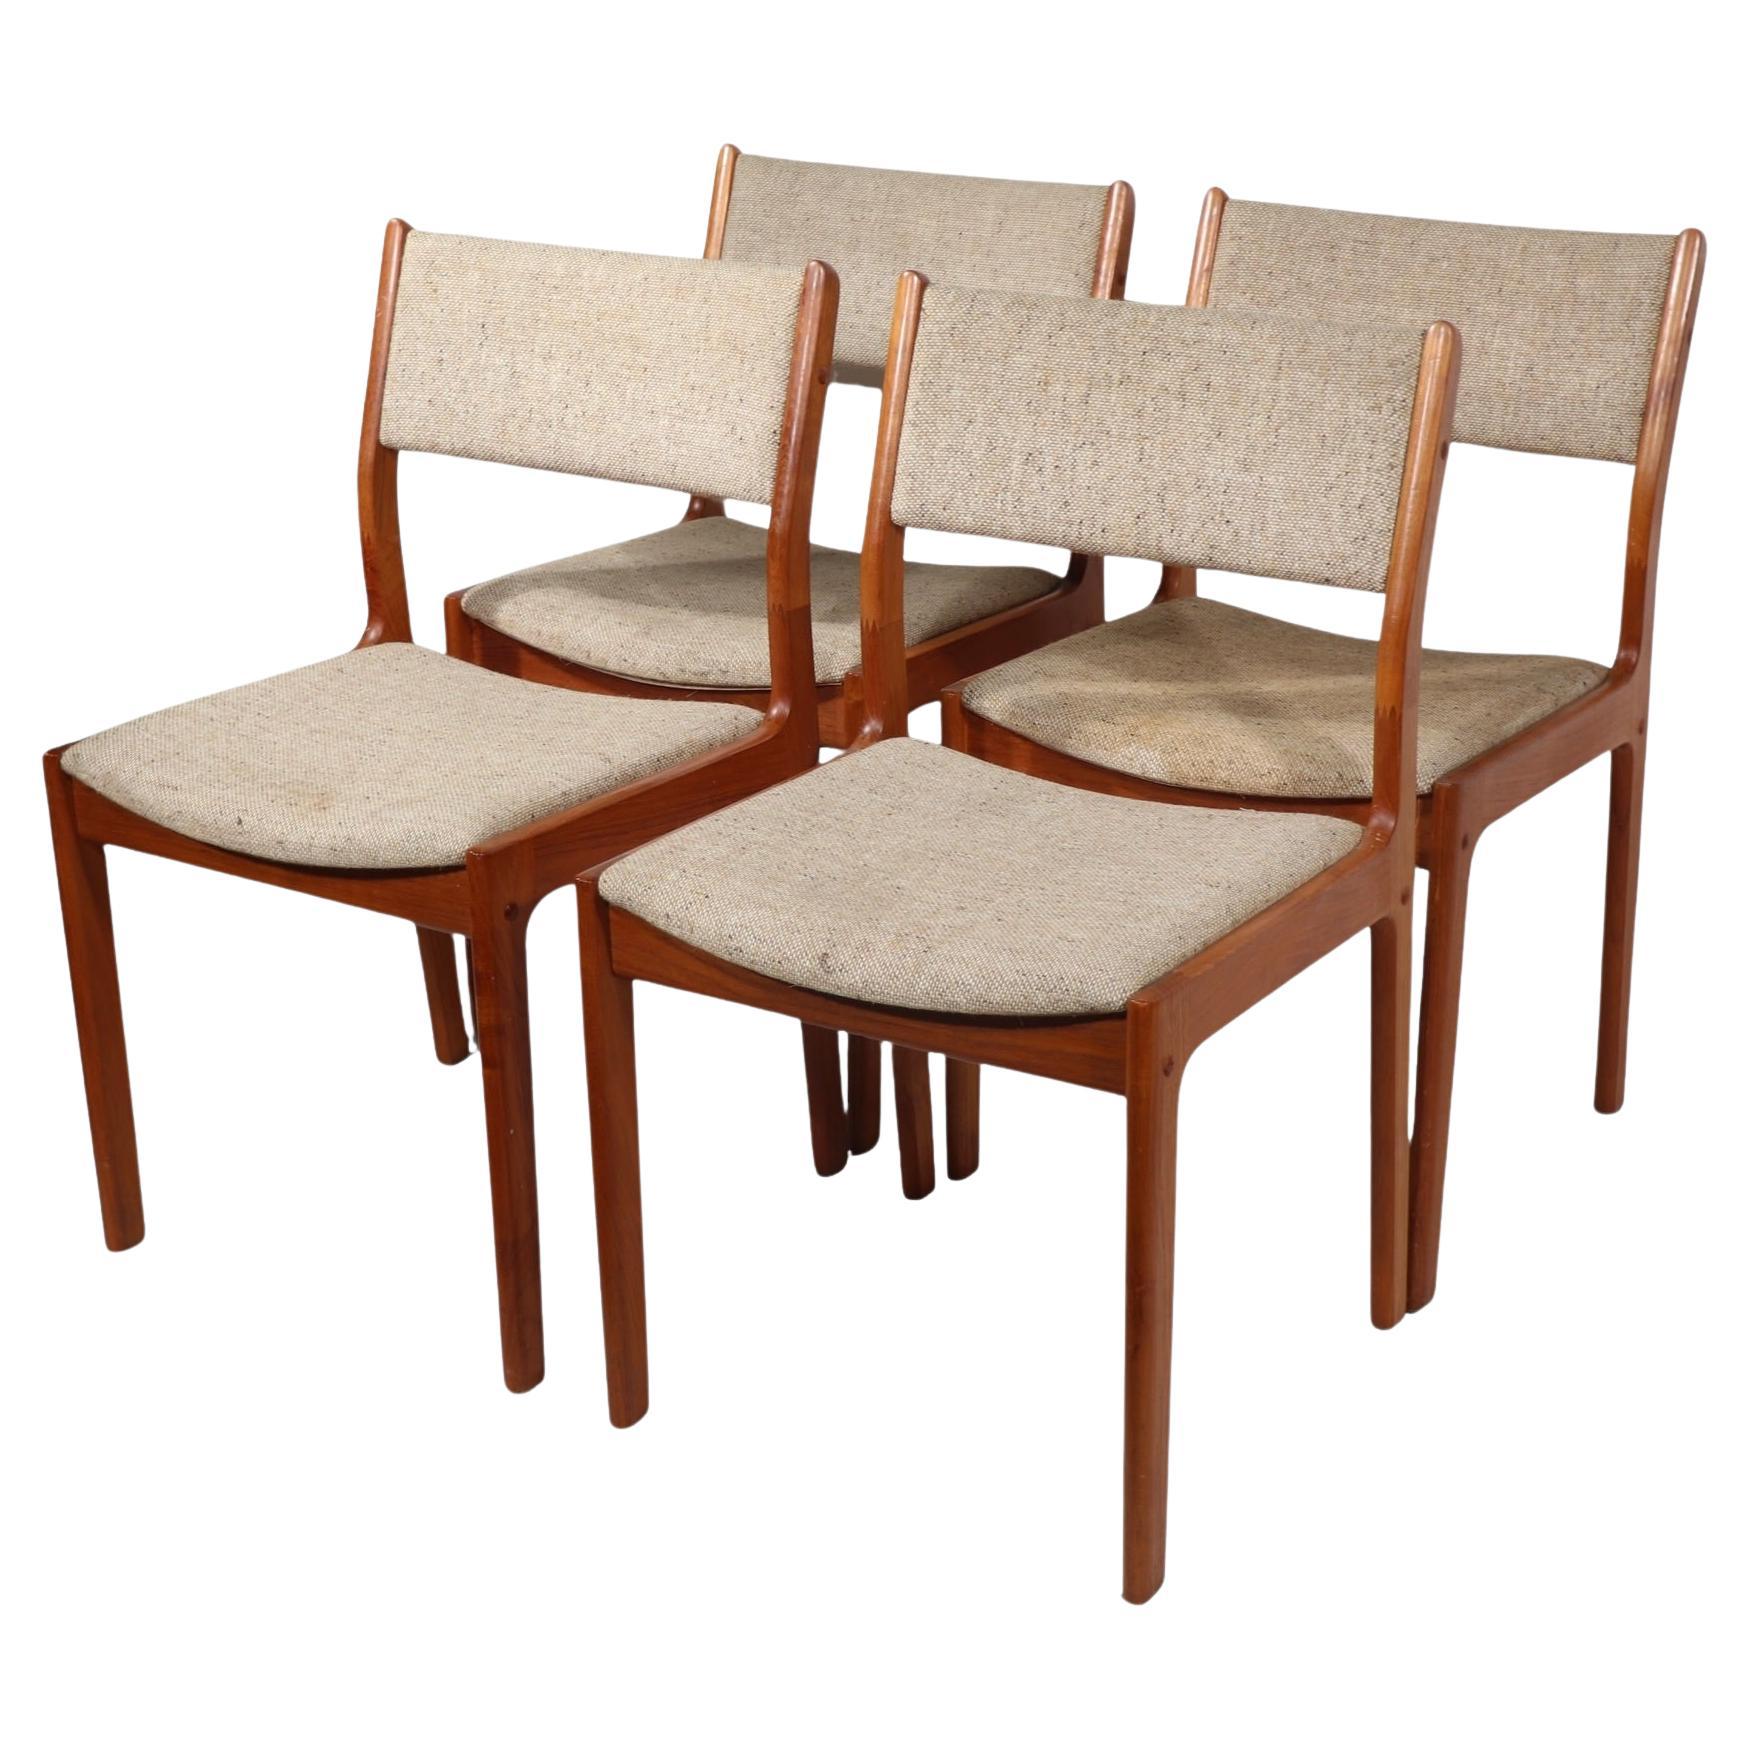 Four Teak  Danish Style Mid Century Dining Chairs by D Scan c 1950/1960's  For Sale